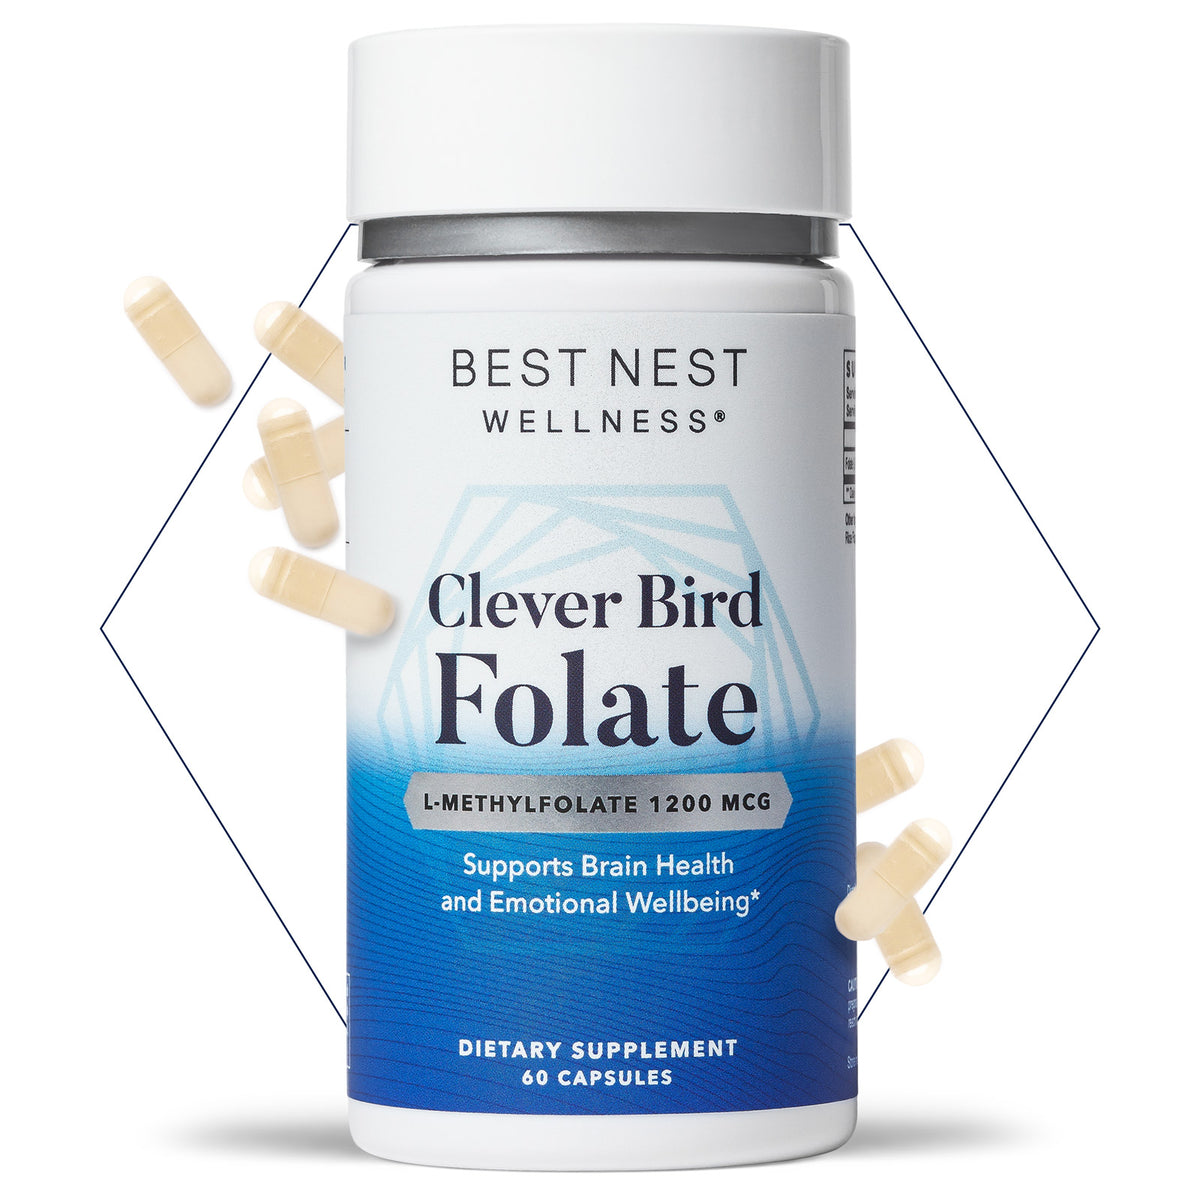 Clever Bird Folate (Methylfolate) Capsules